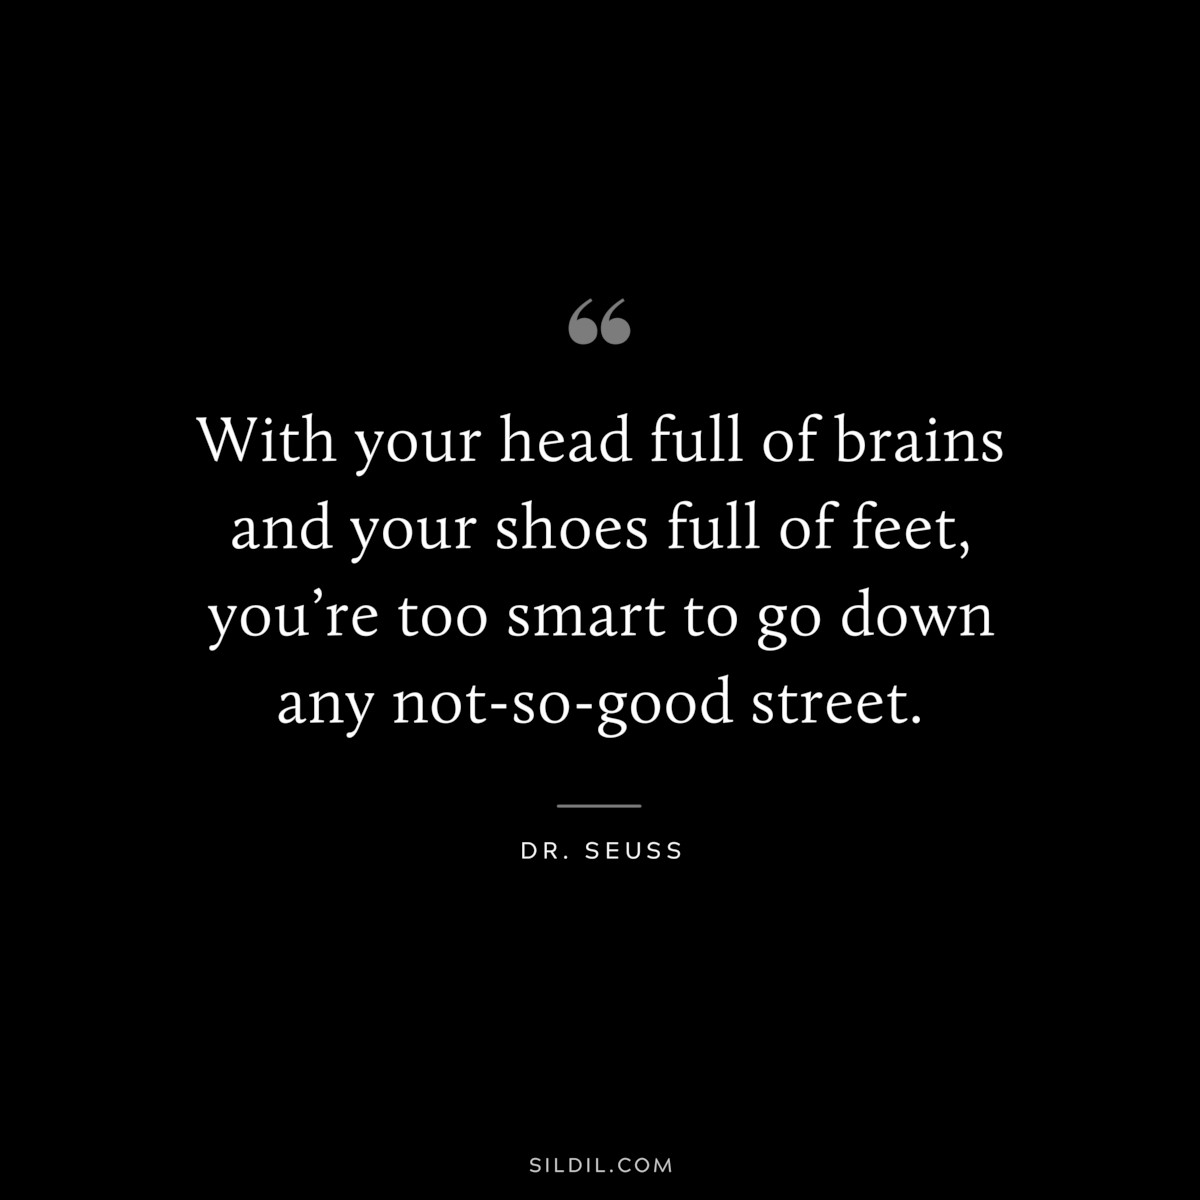 With your head full of brains and your shoes full of feet, you’re too smart to go down any not-so-good street. ― Dr. Seuss